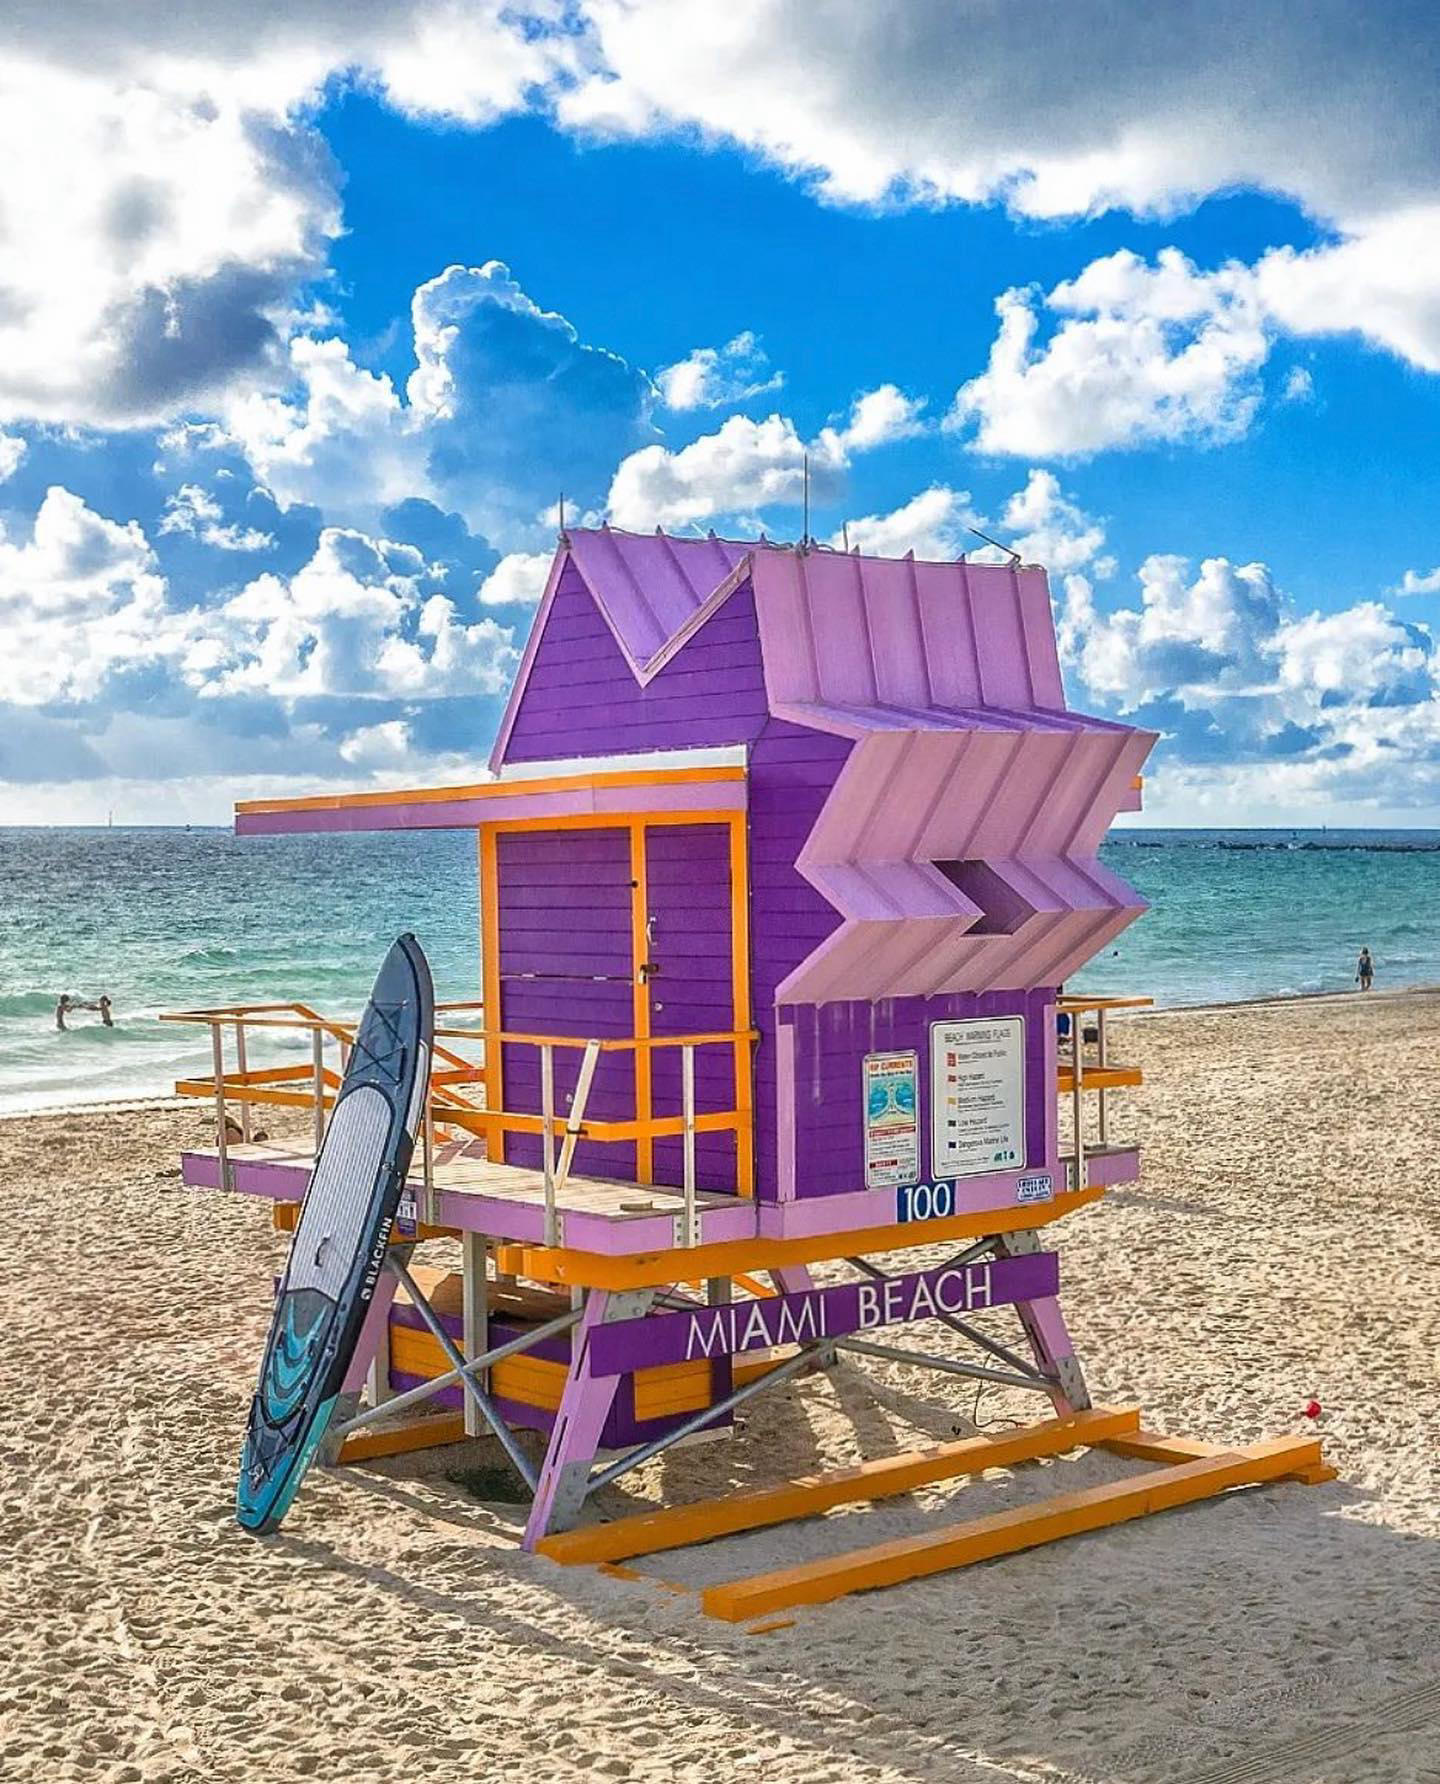 image  1 Miami - These brightly colored and completely unique lifeguard towers are one of our favorite things